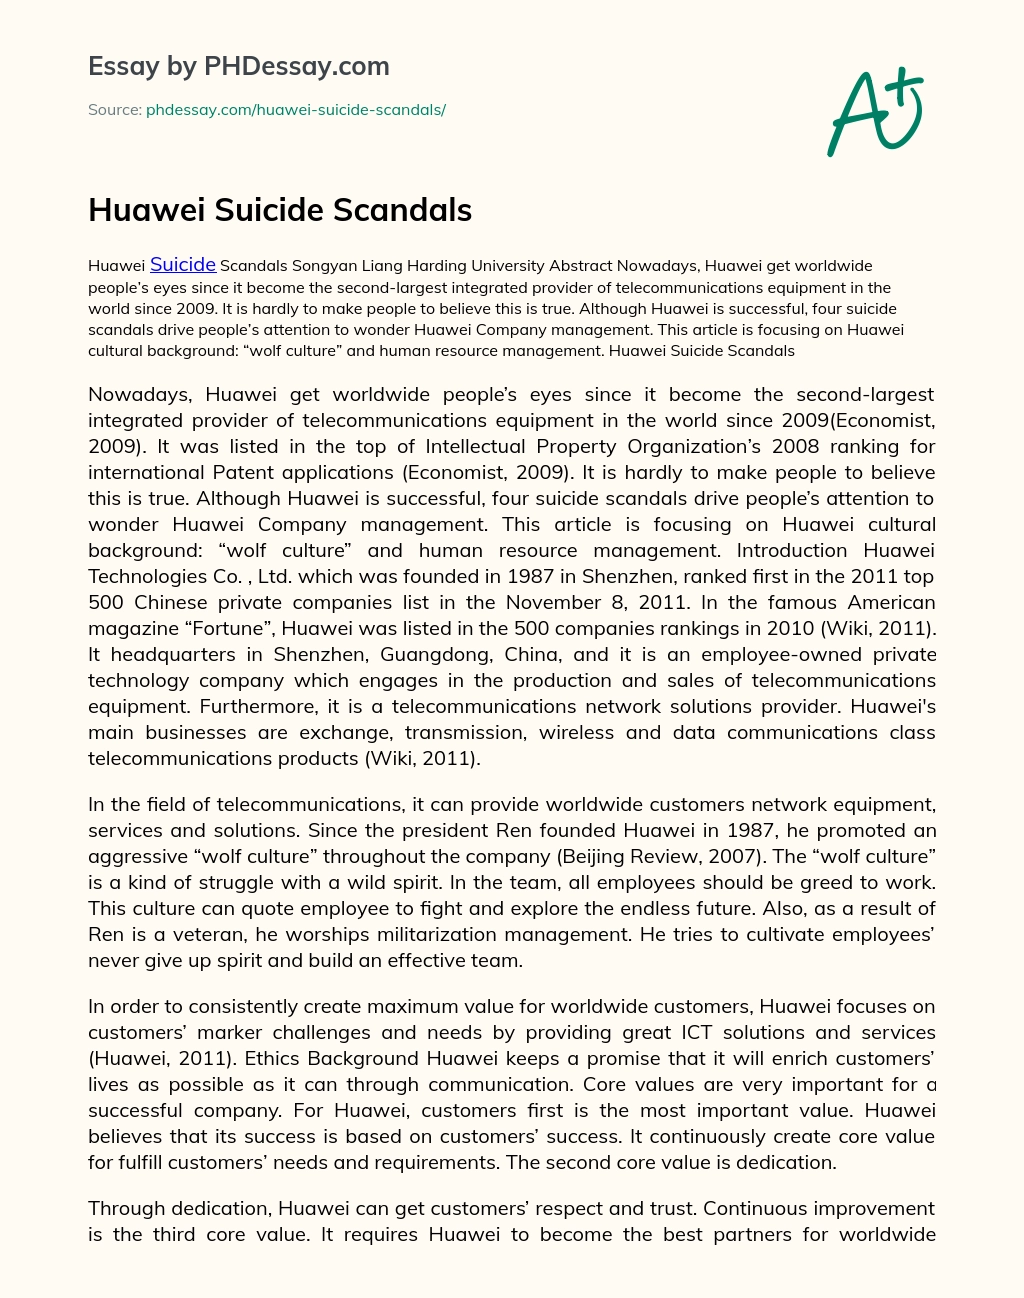 Huawei Suicide Scandals essay